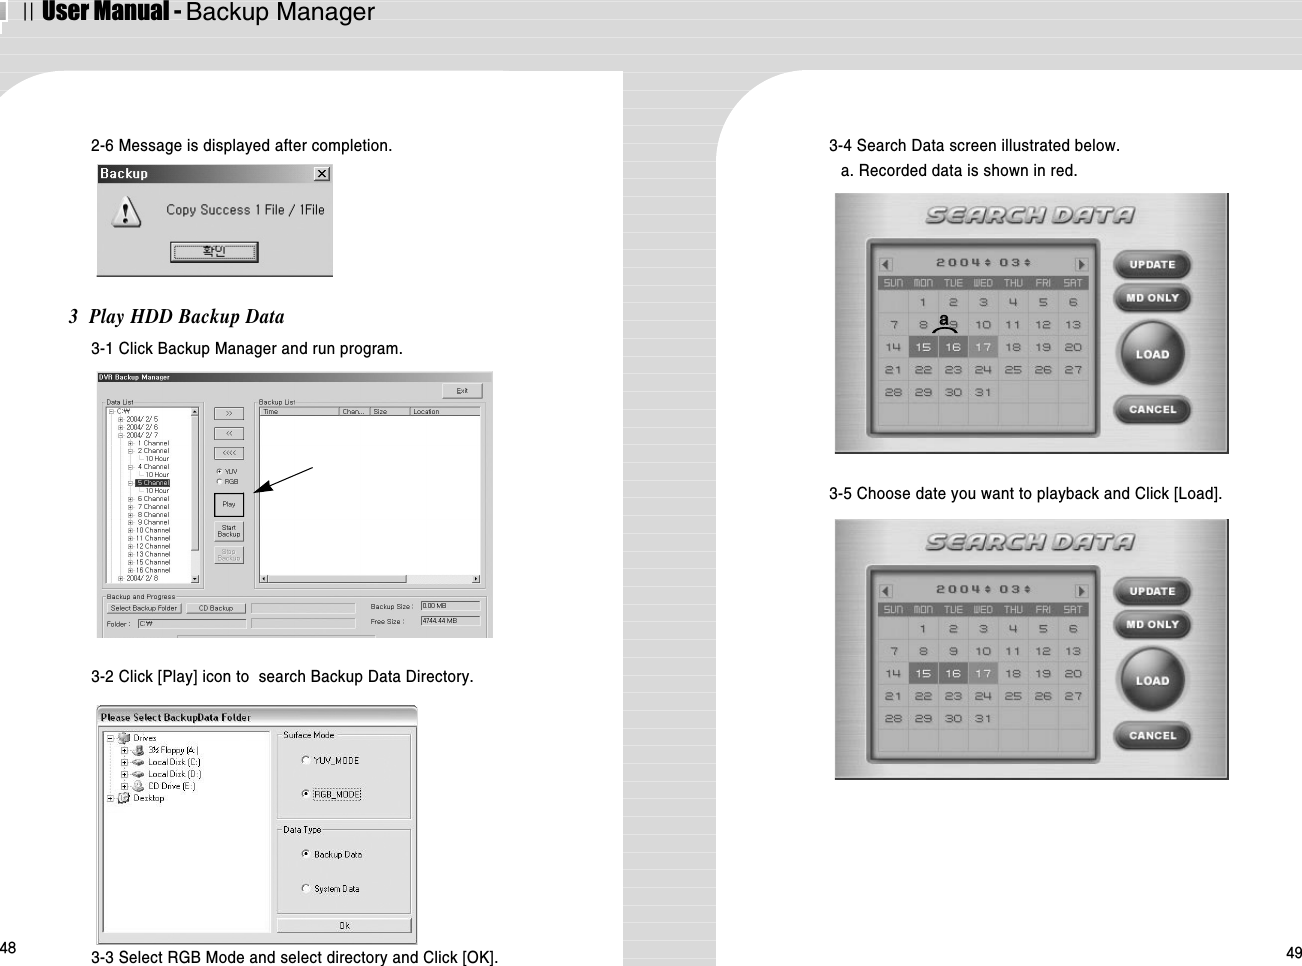 ⅡUser Manual - Backup Manager48 493  Play HDD Backup Data3-1 Click Backup Manager and run program.2-6 Message is displayed after completion. 3-4 Search Data screen illustrated below.a. Recorded data is shown in red.3-5 Choose date you want to playback and Click [Load].3-2 Click [Play] icon to  search Backup Data Directory.3-3 Select RGB Mode and select directory and Click [OK].aa⌒⌒